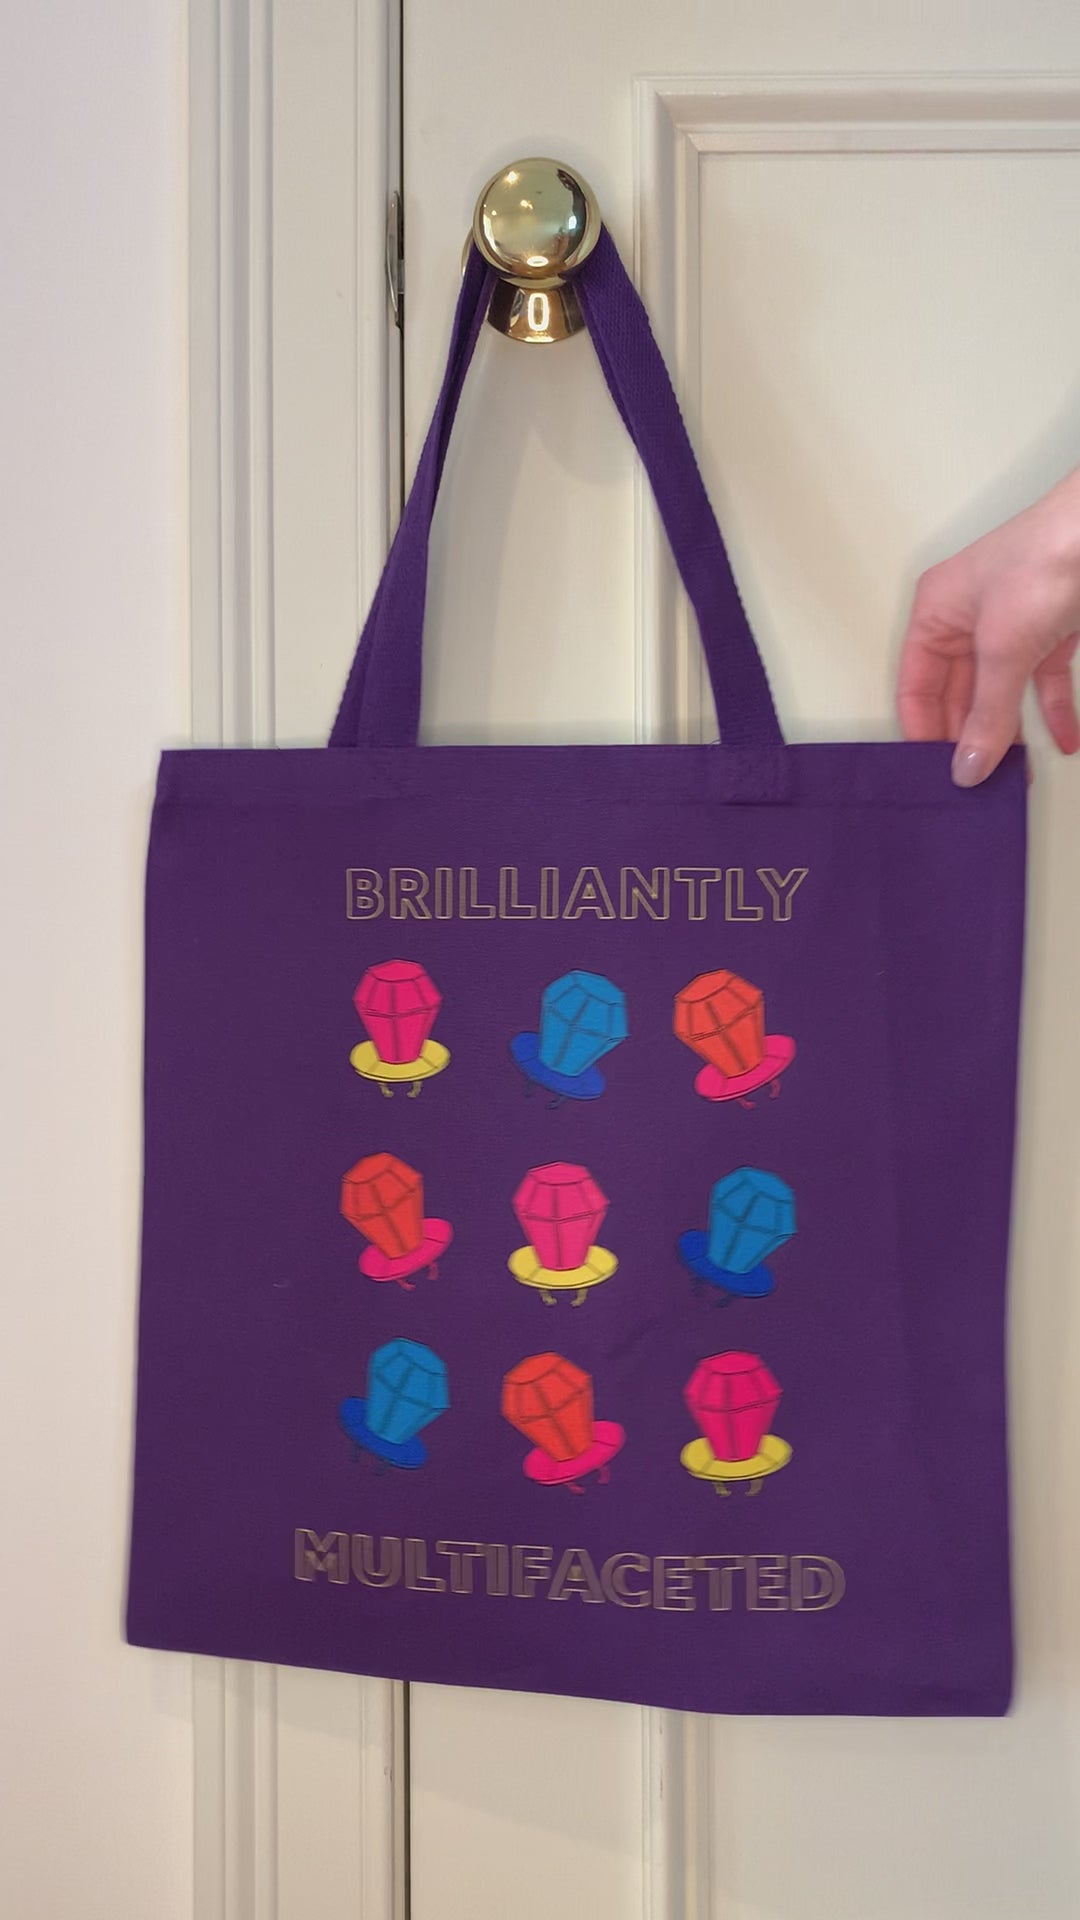 A purple tote that reads "Brilliantly Multifaceted" hangs from a doorknob